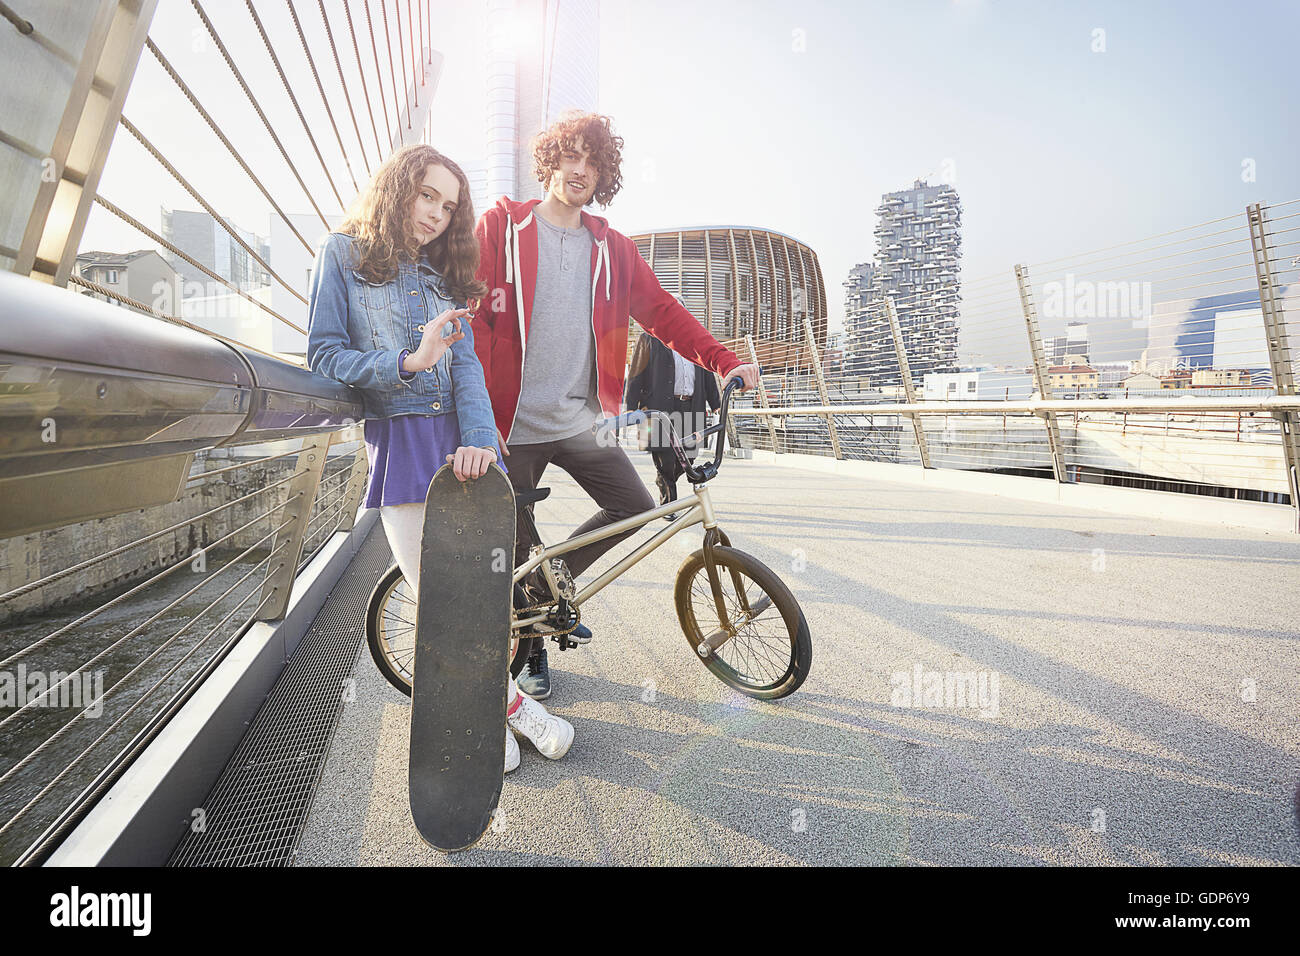 Girl and man with BMX and skateboard in urban area Stock Photo